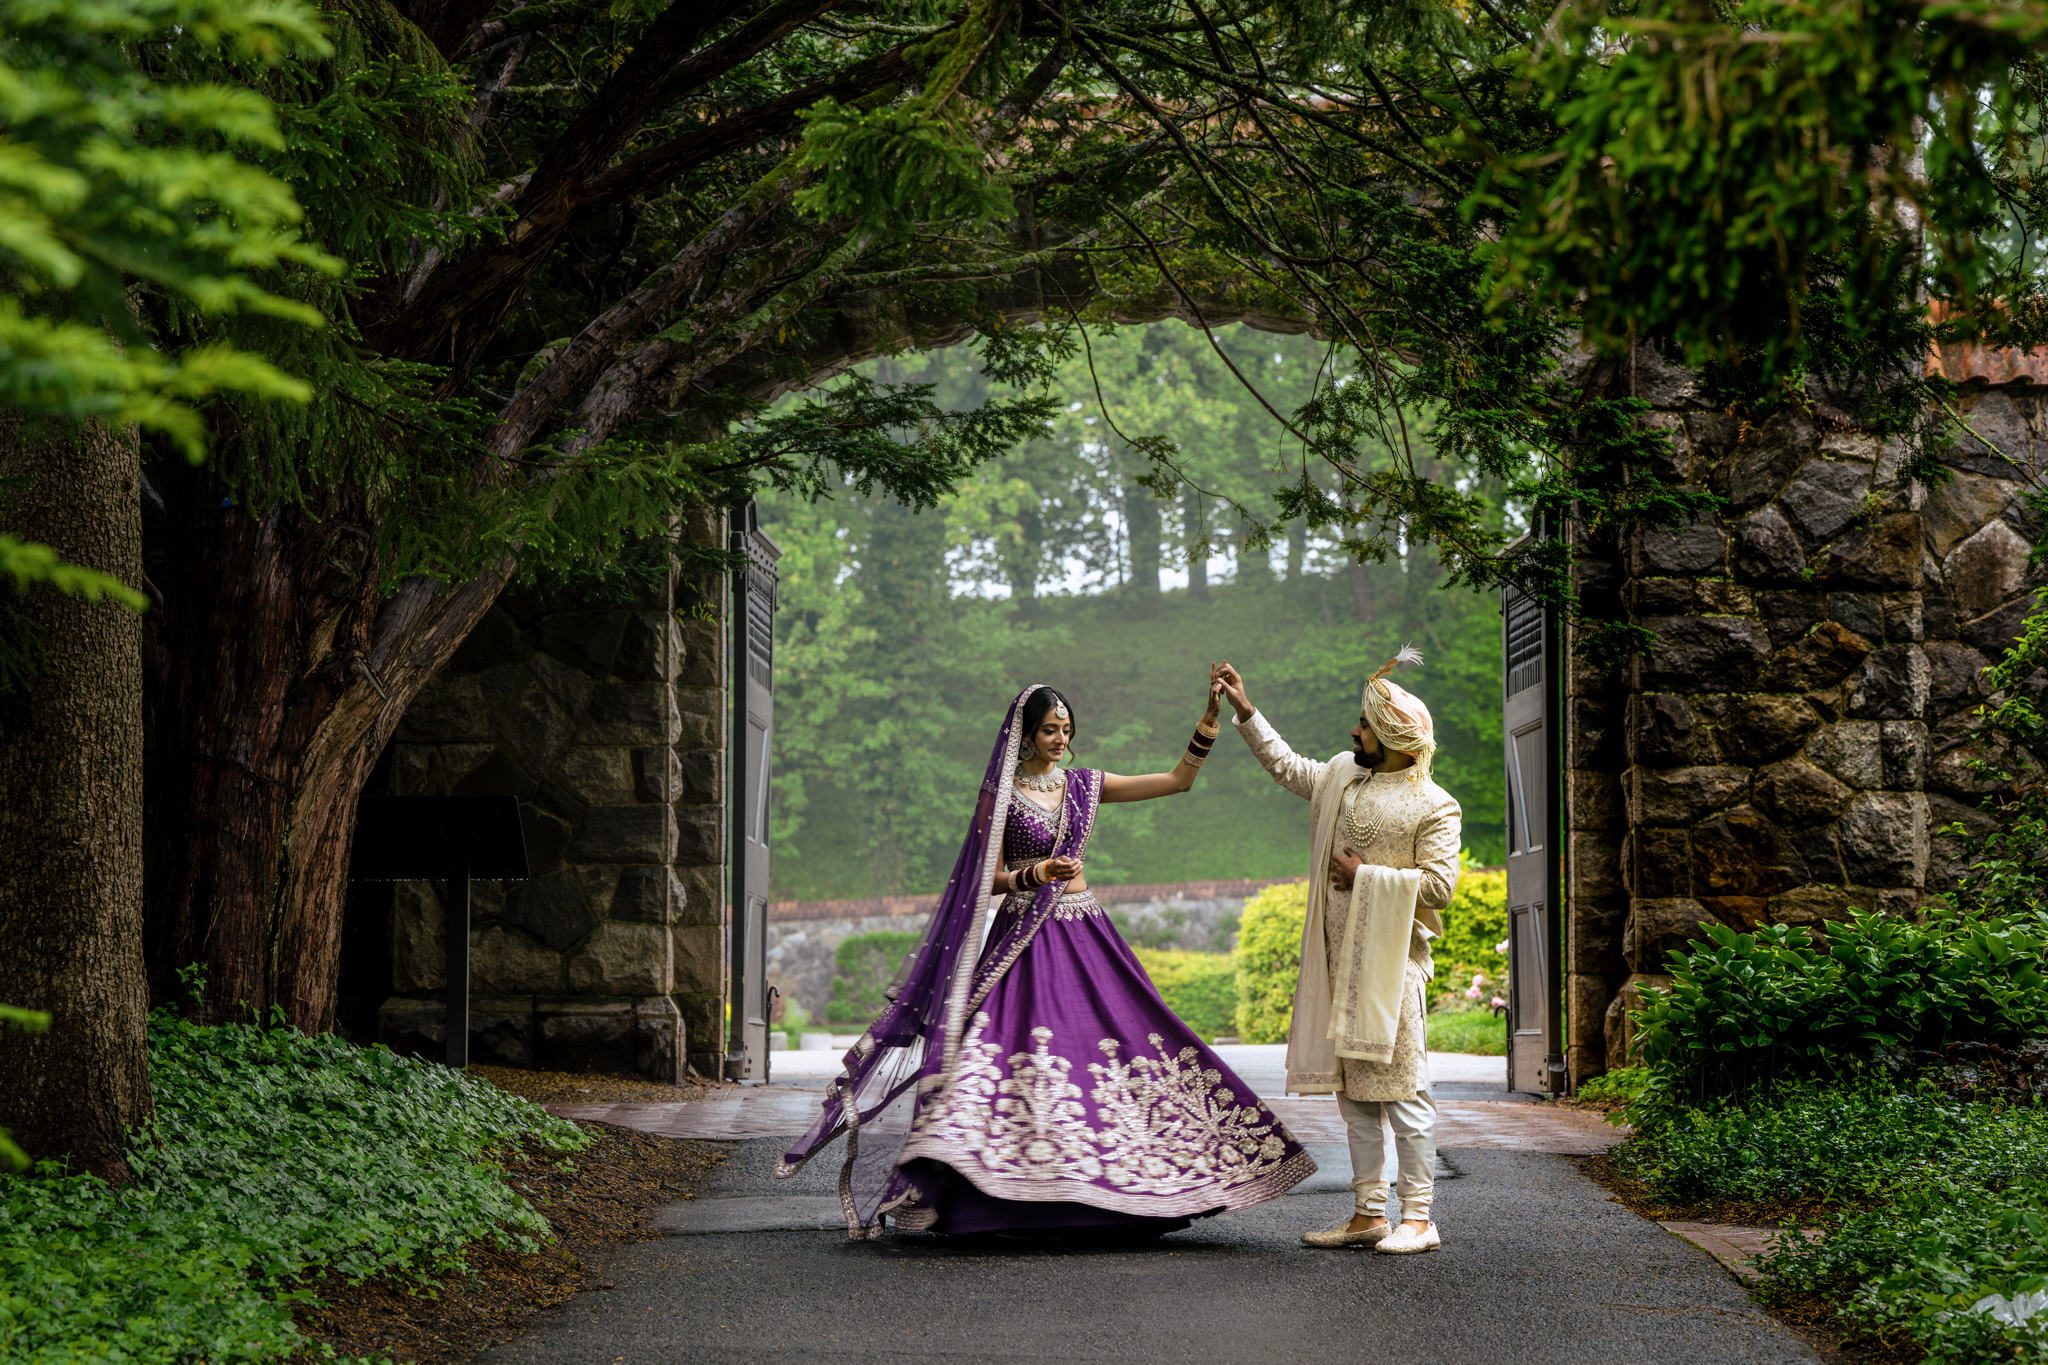 indian wedding couple share first look in conservatory gardens at biltmore estate